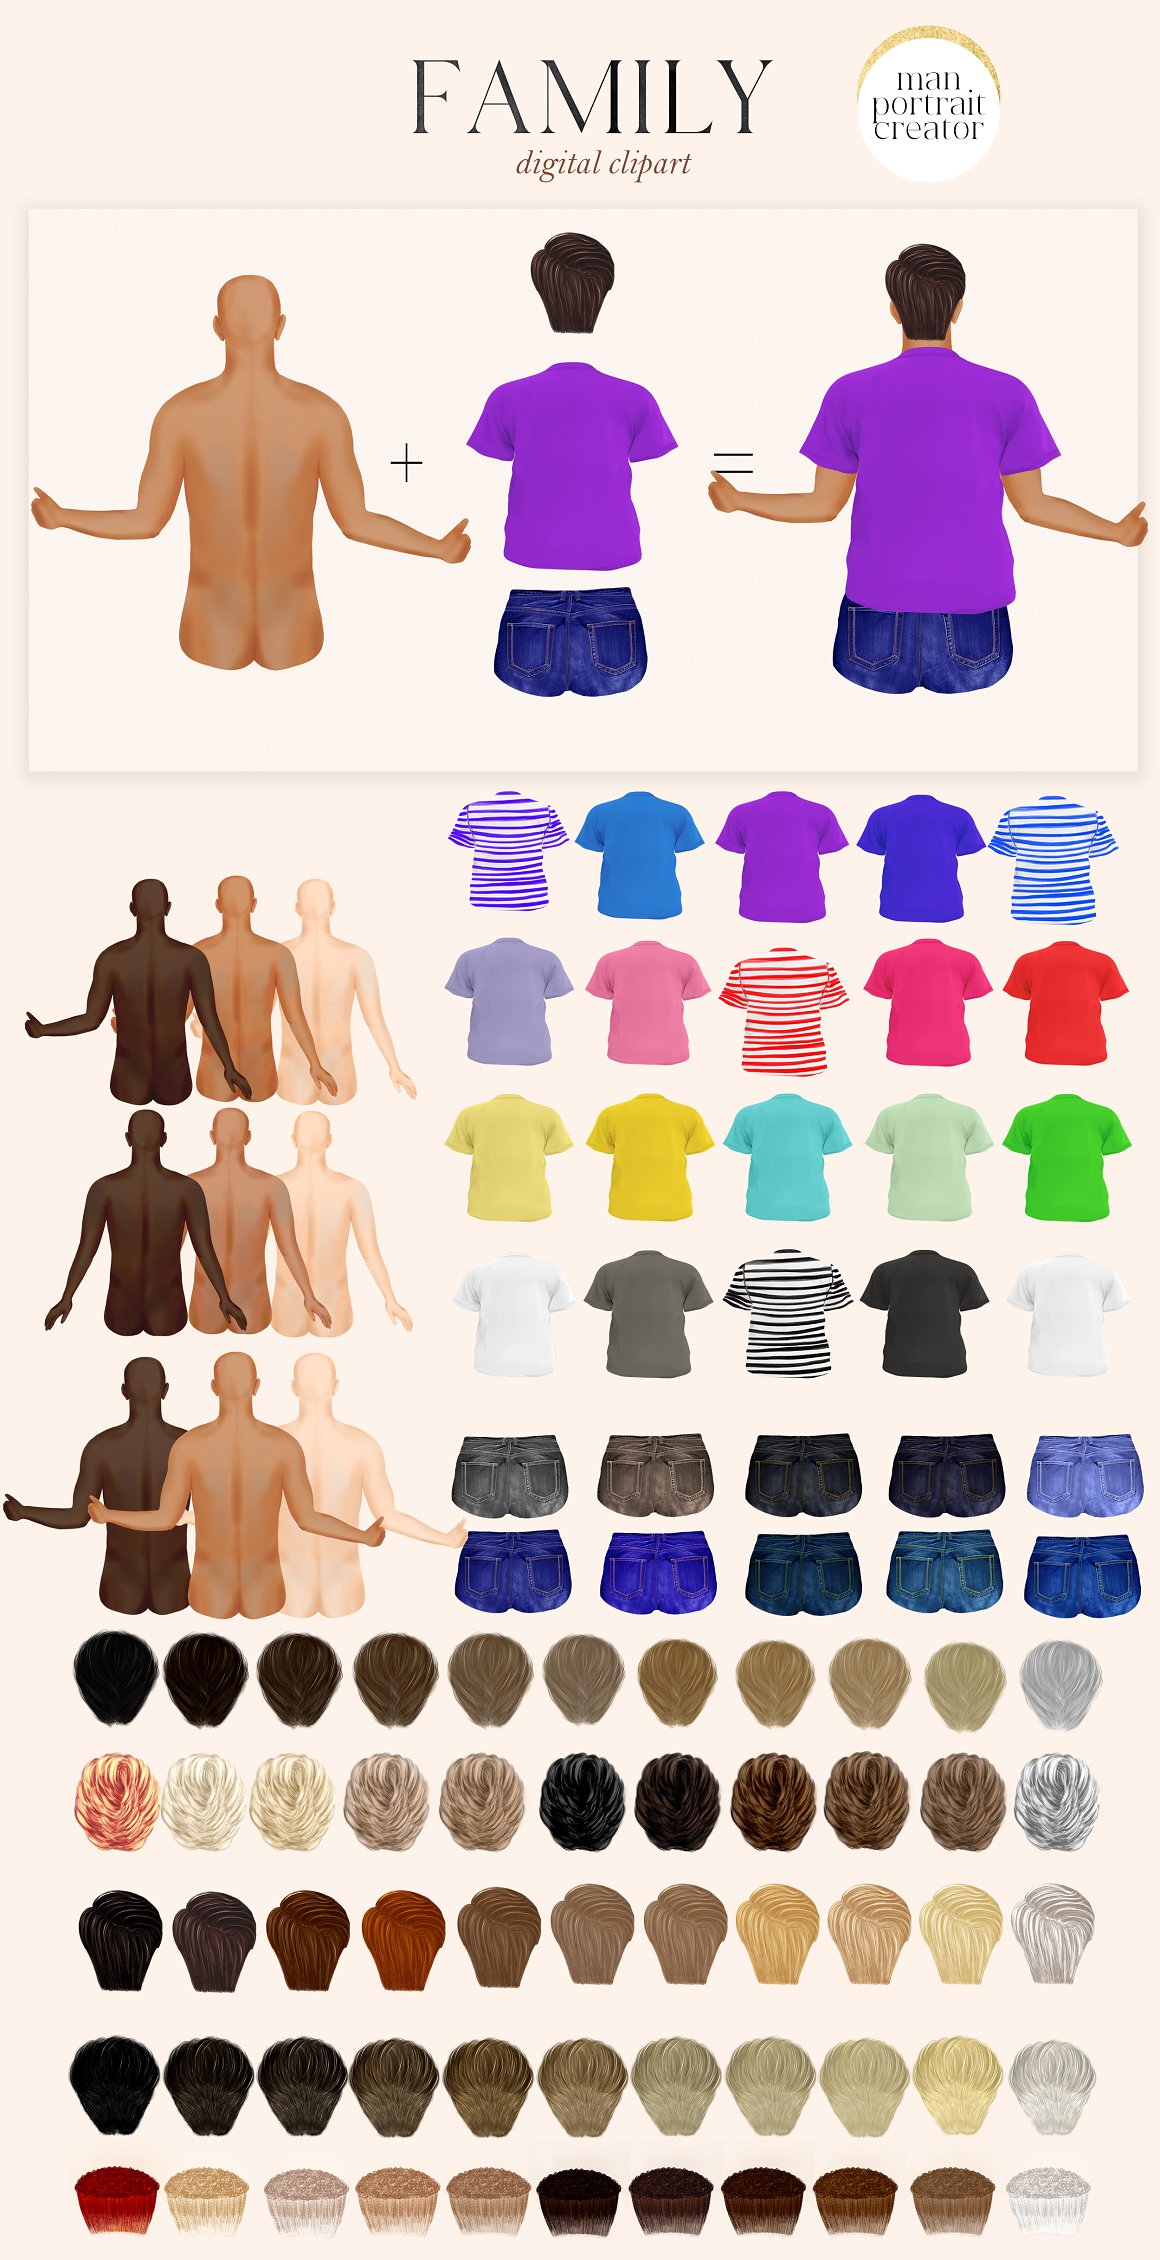 Clipart of body in different skin tones, clothes and hairstyles for father.